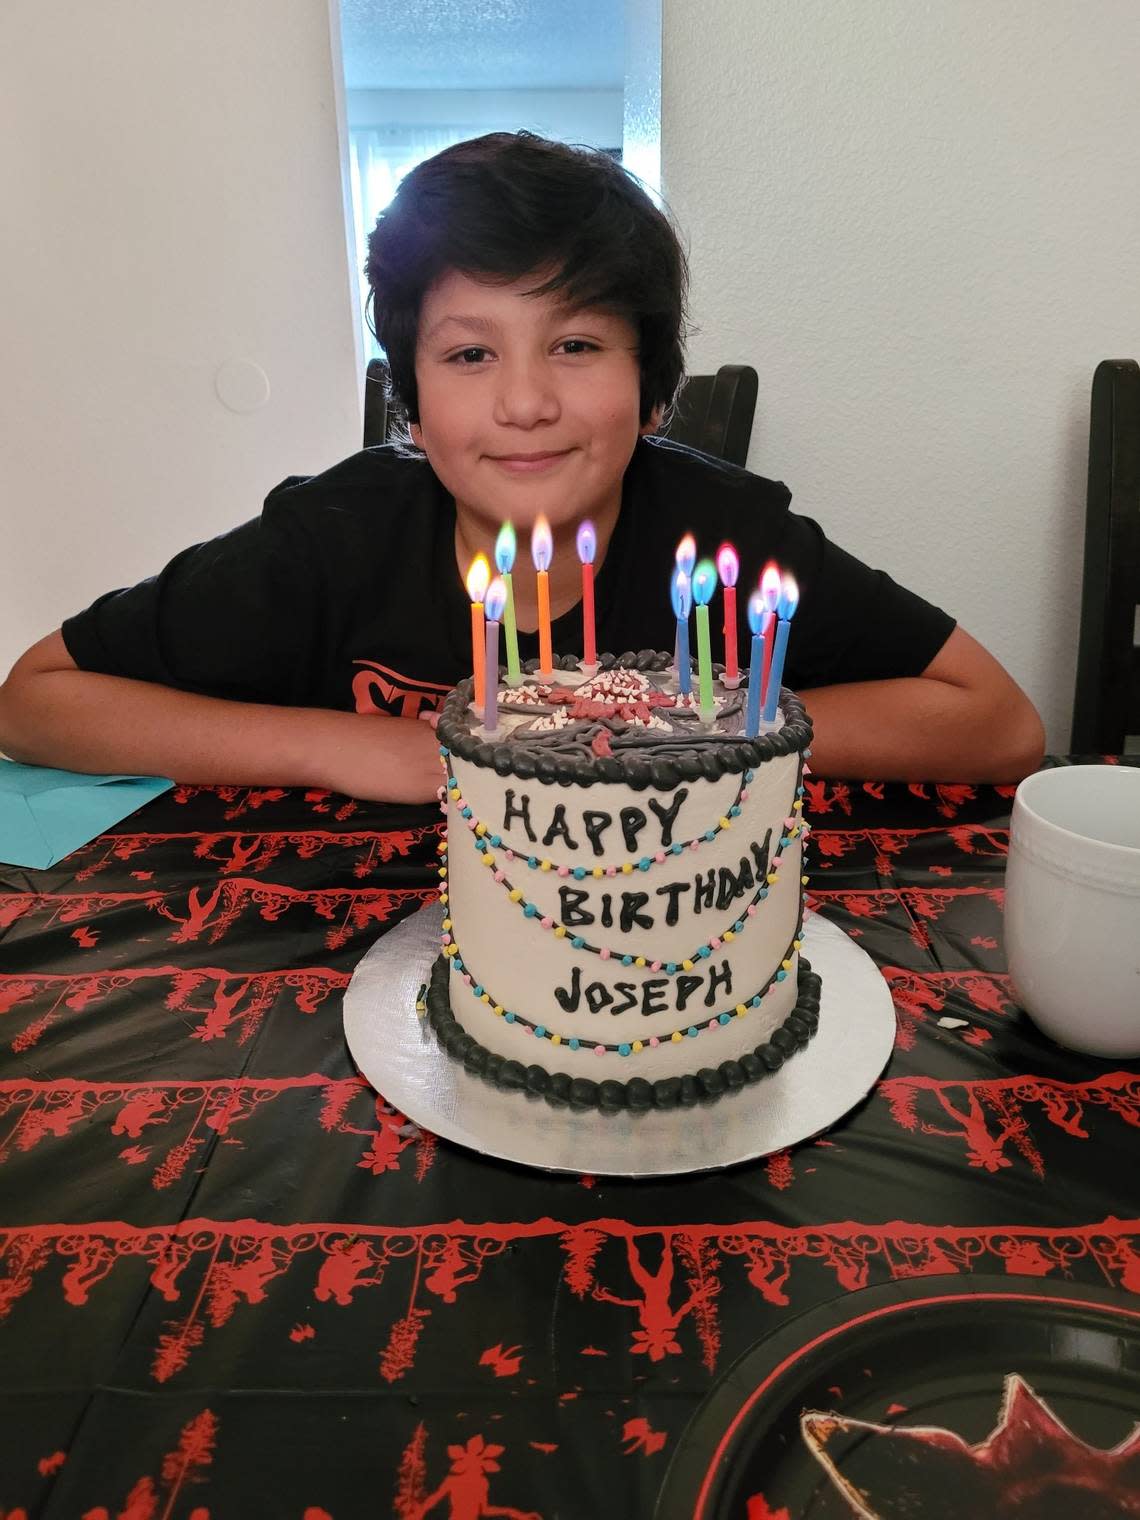 Joseph Martinez, seen here at his birthday, was shot at a Kennewick home on Feb. 29 while he was with two other boys.